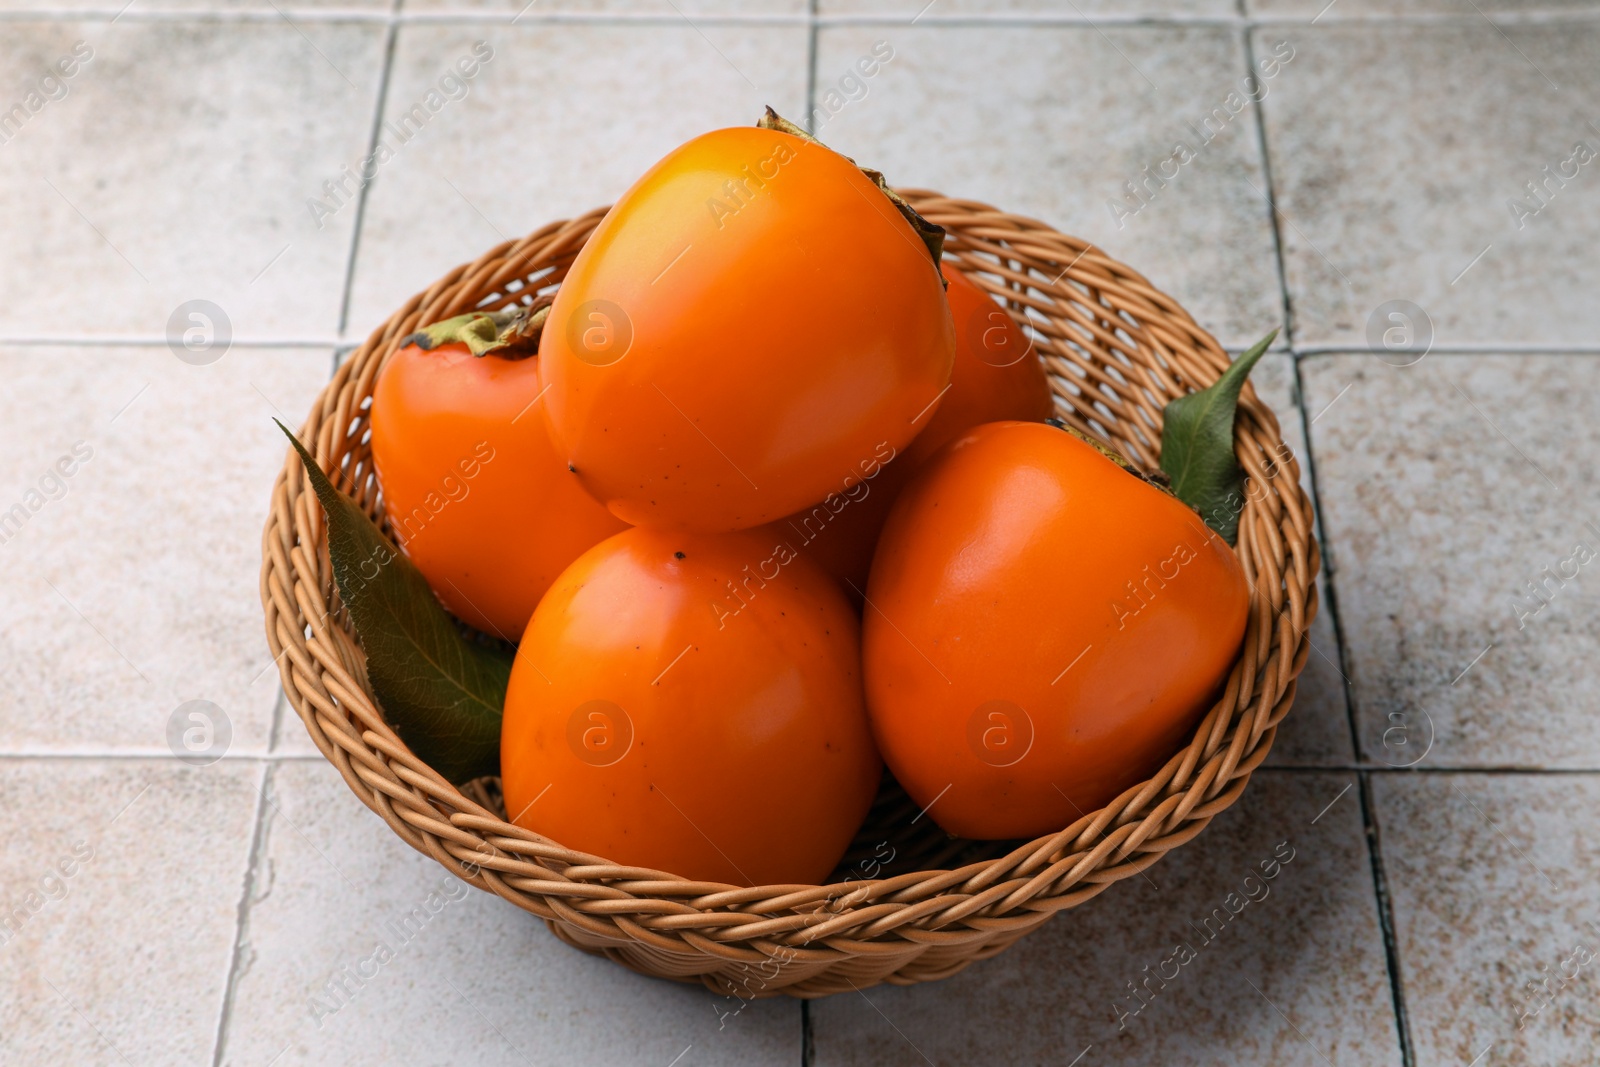 Photo of Delicious ripe juicy persimmons in wicker basket on tiled surface